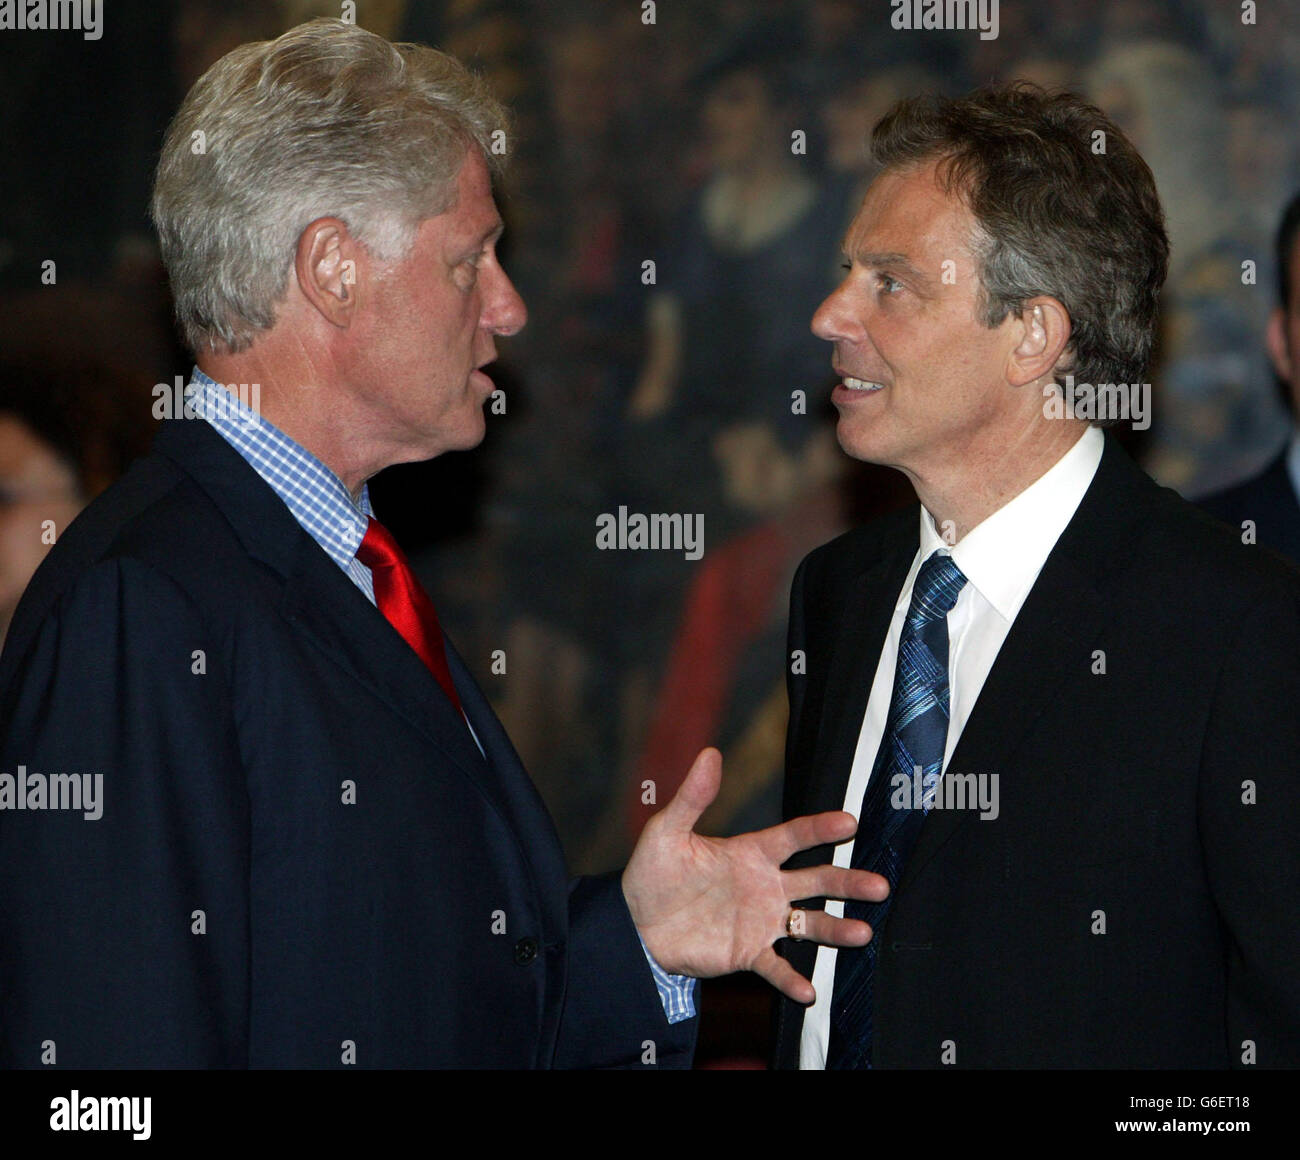 Former US President Bill Clinton talks to Prime Minister Tony Blair at the Guildhall in the City of London, venue for the progressive Governance dinner. Stock Photo